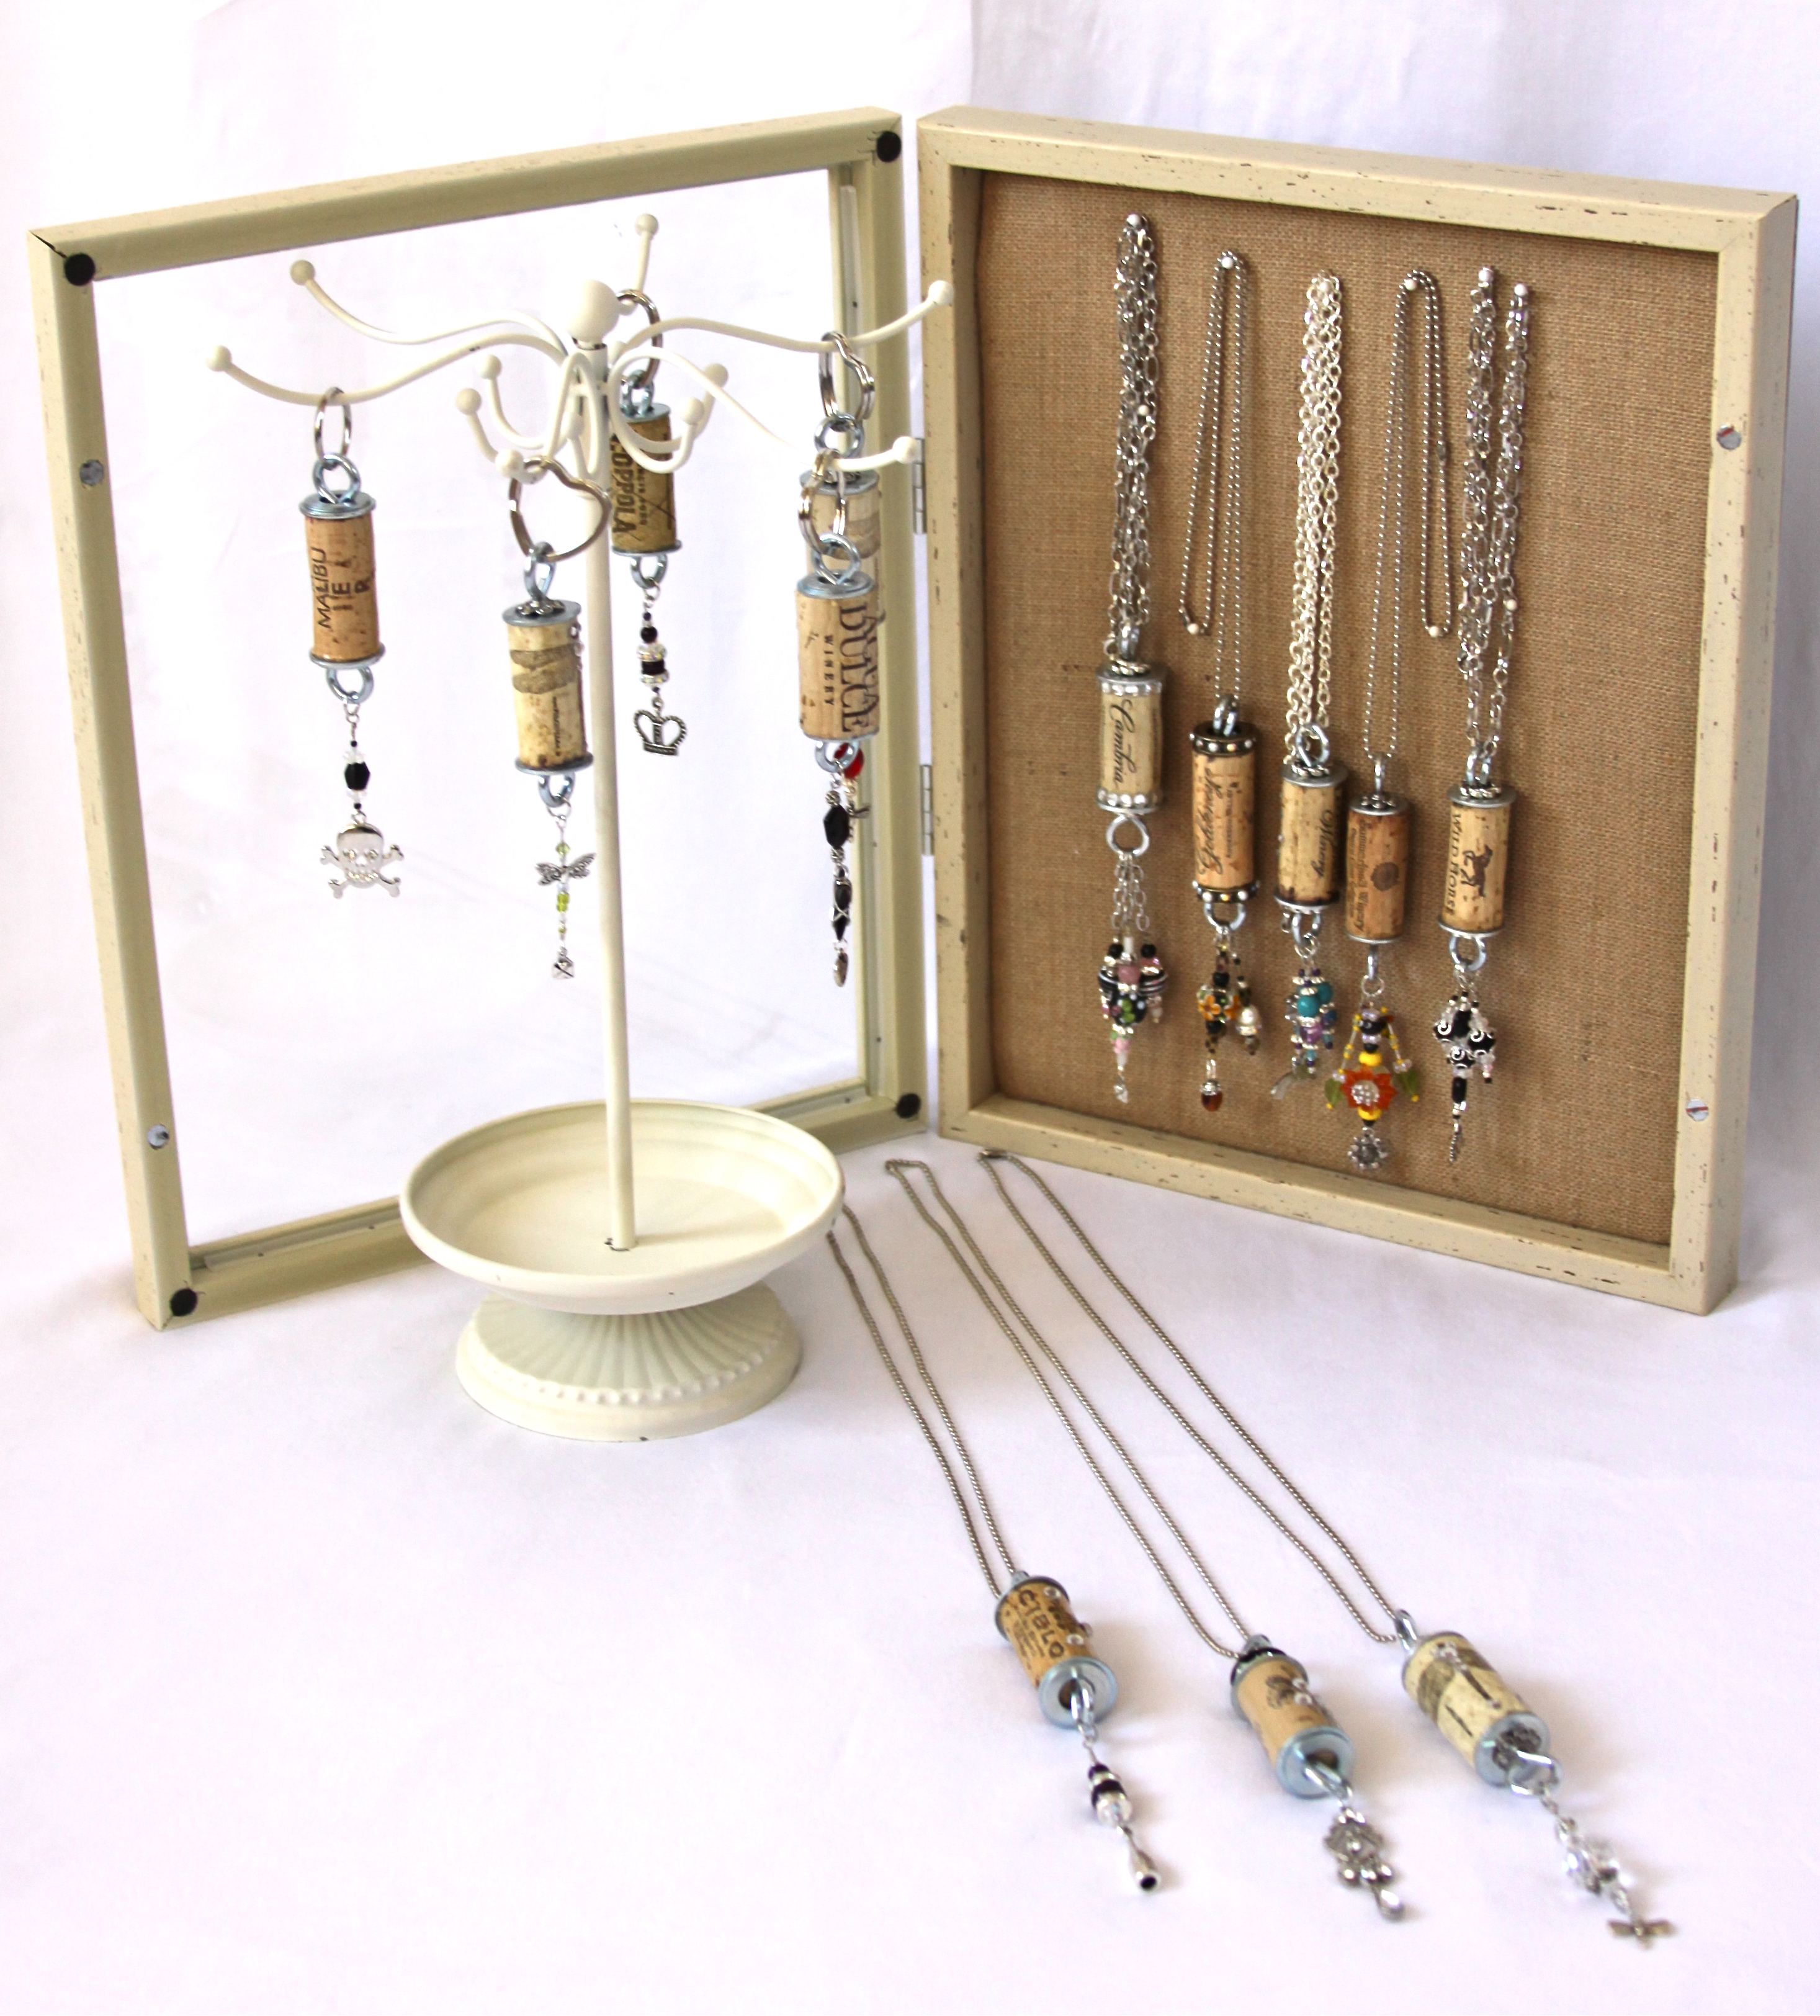 Kym necklaces and key chain